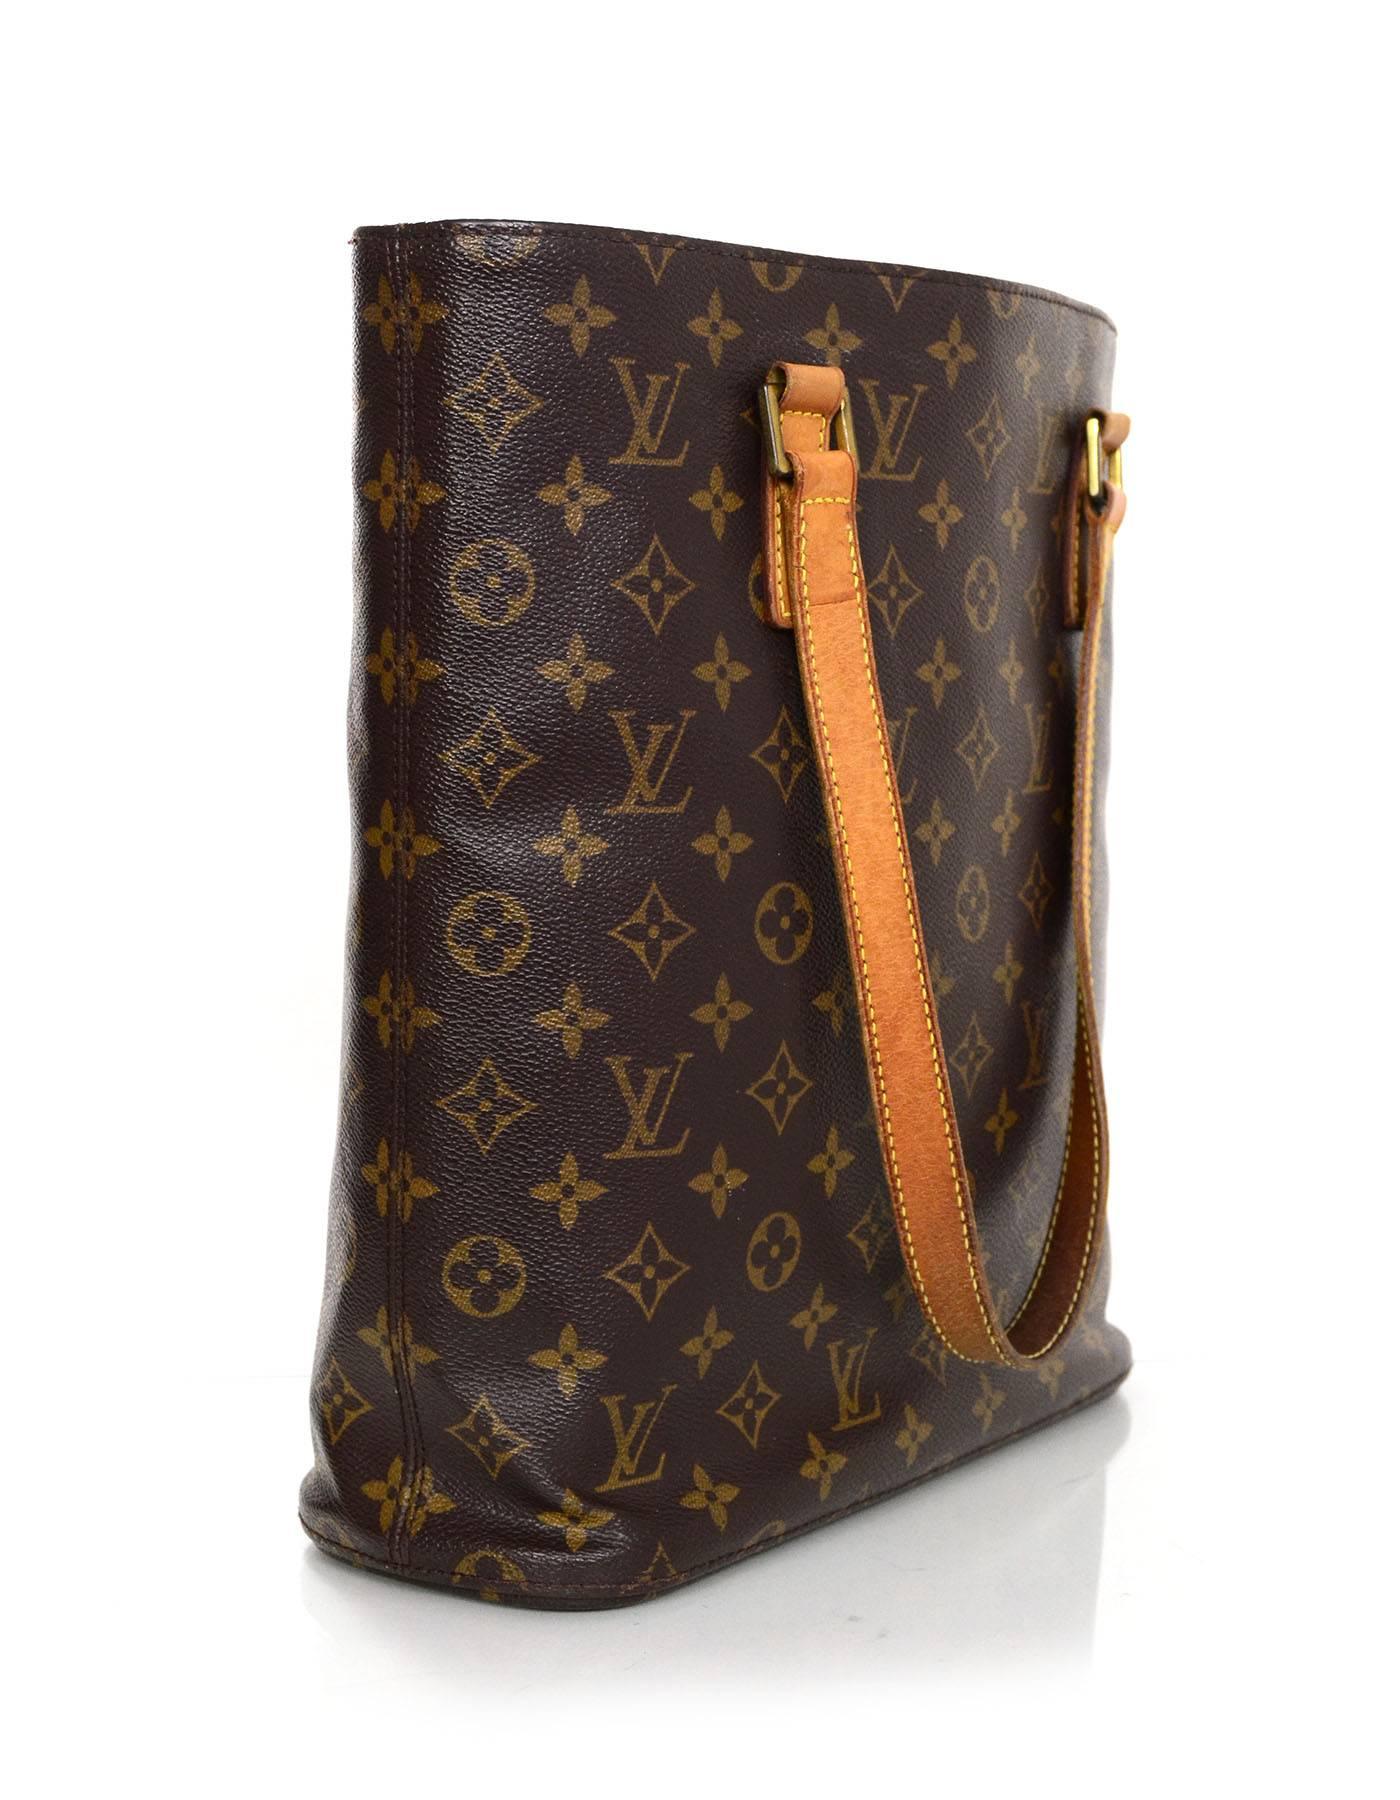 Louis Vuitton Monogram Vavin GM Tote

Made In: France
Year of Production: 2002
Color: Brown and tan
Hardware: Goldtone
Materials: Coated canvas, vachetta leather
Lining: Brown canvas
Closure/Opening: Open top
Exterior Pockets: None
Interior Pockets: